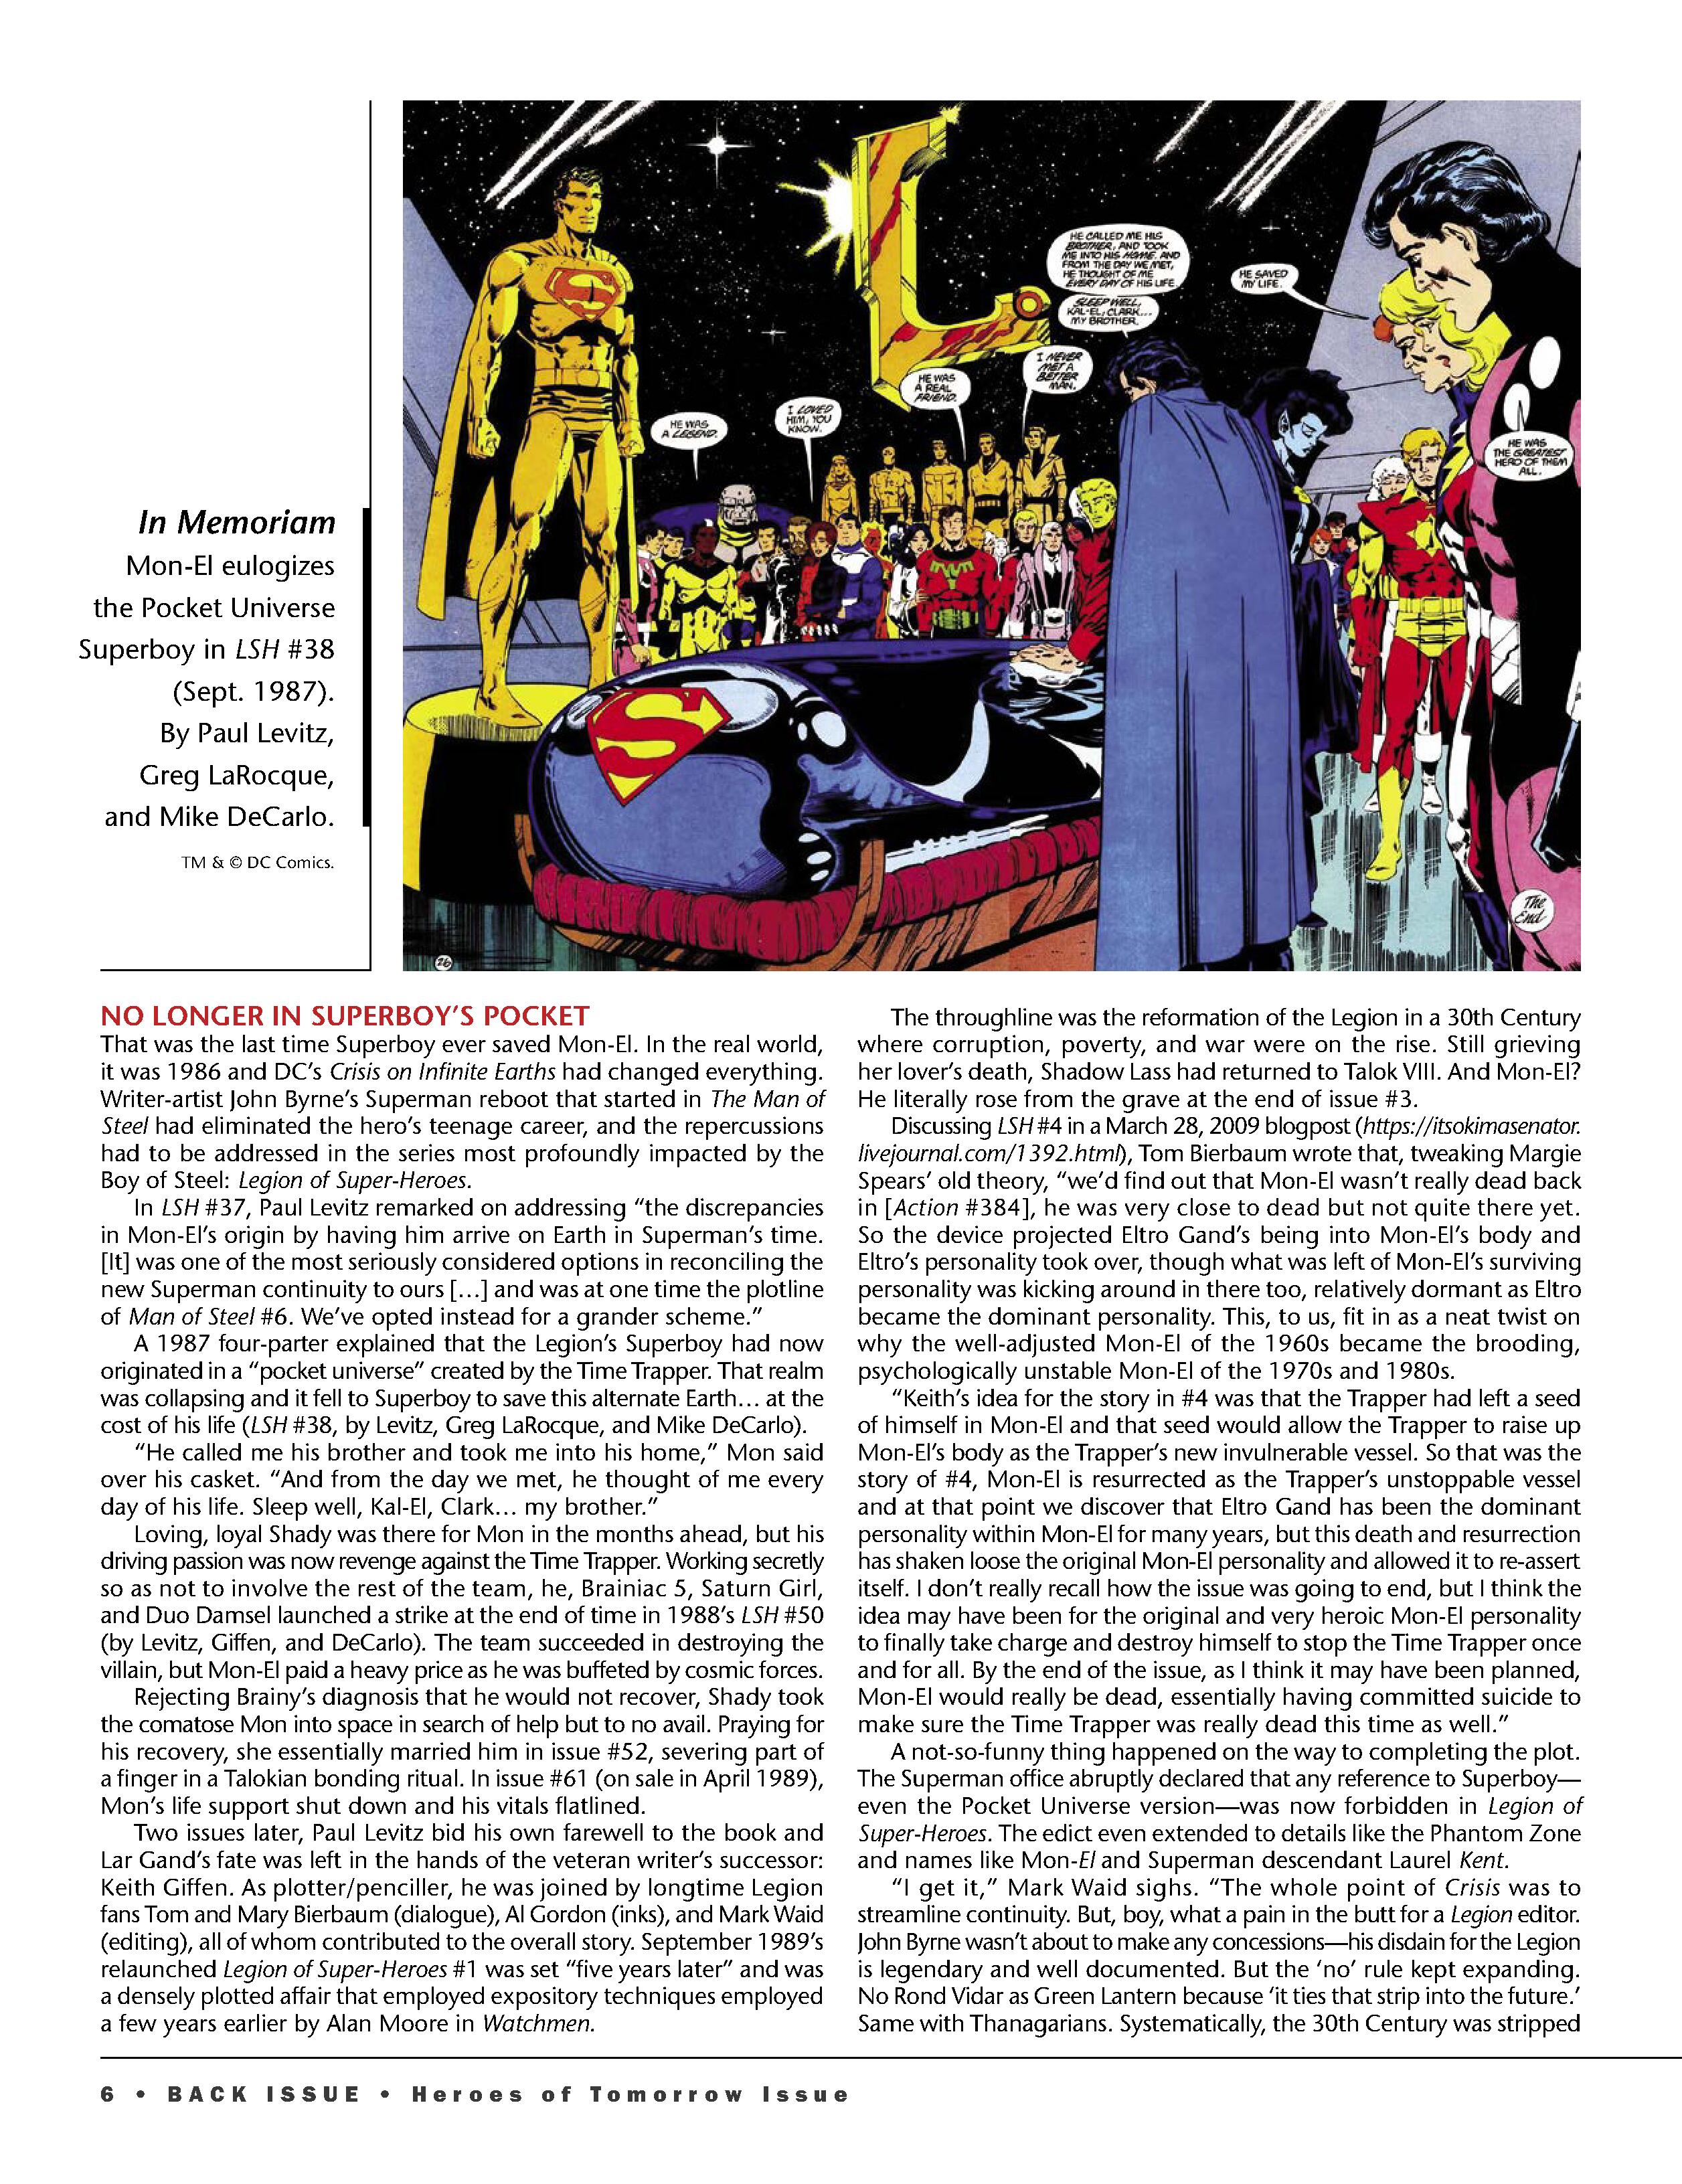 Read online Back Issue comic -  Issue #120 - 8